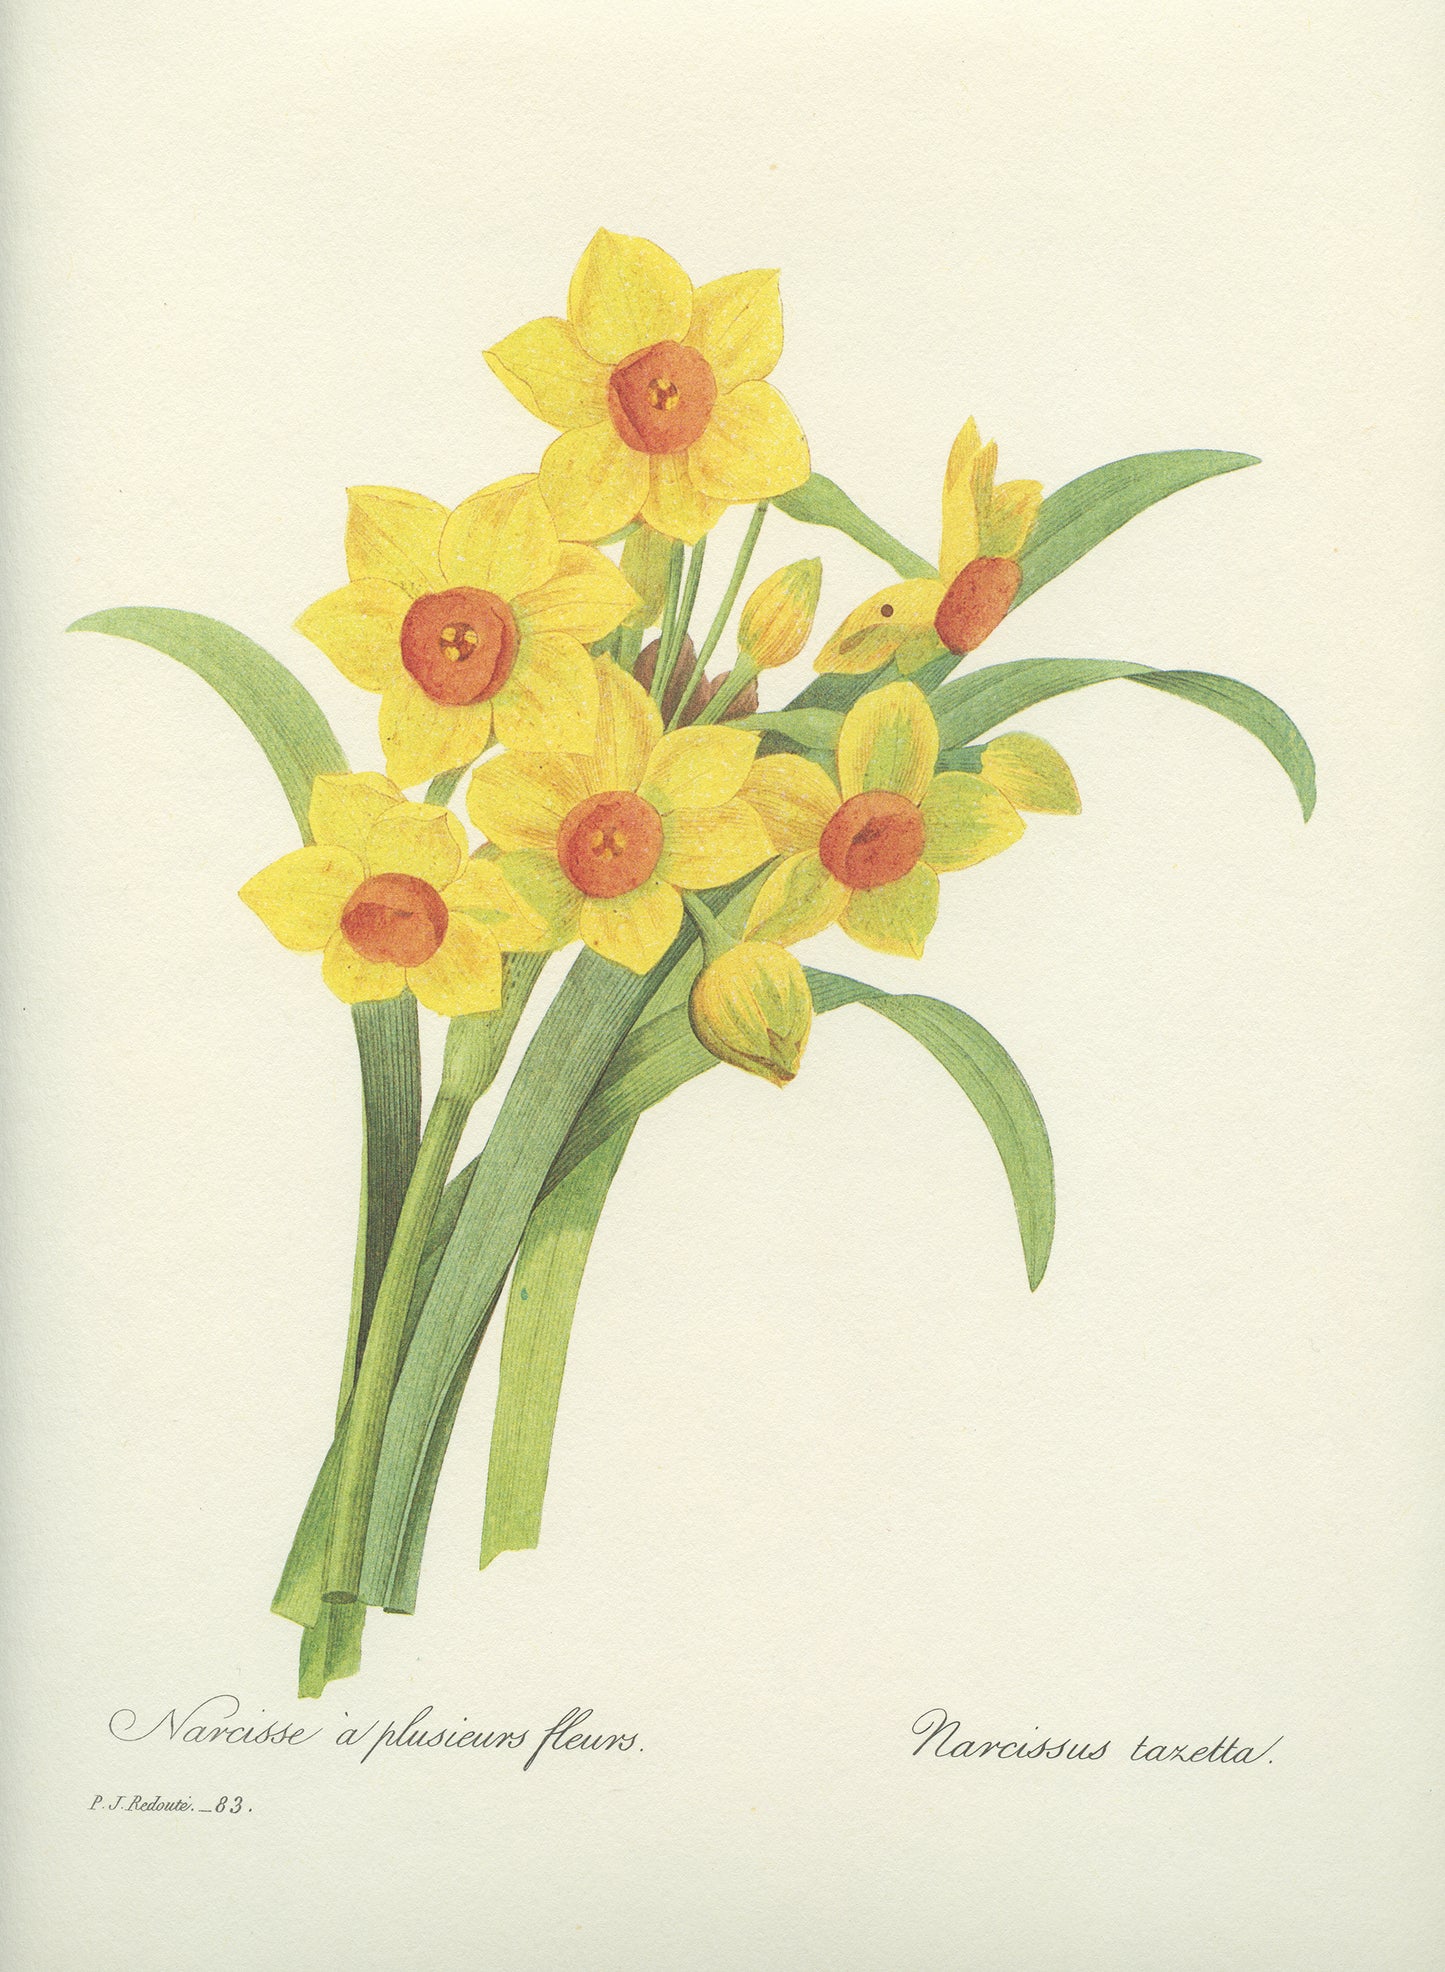 1986 Vintage Yellow Dafffodils Botanical Print by Redouté